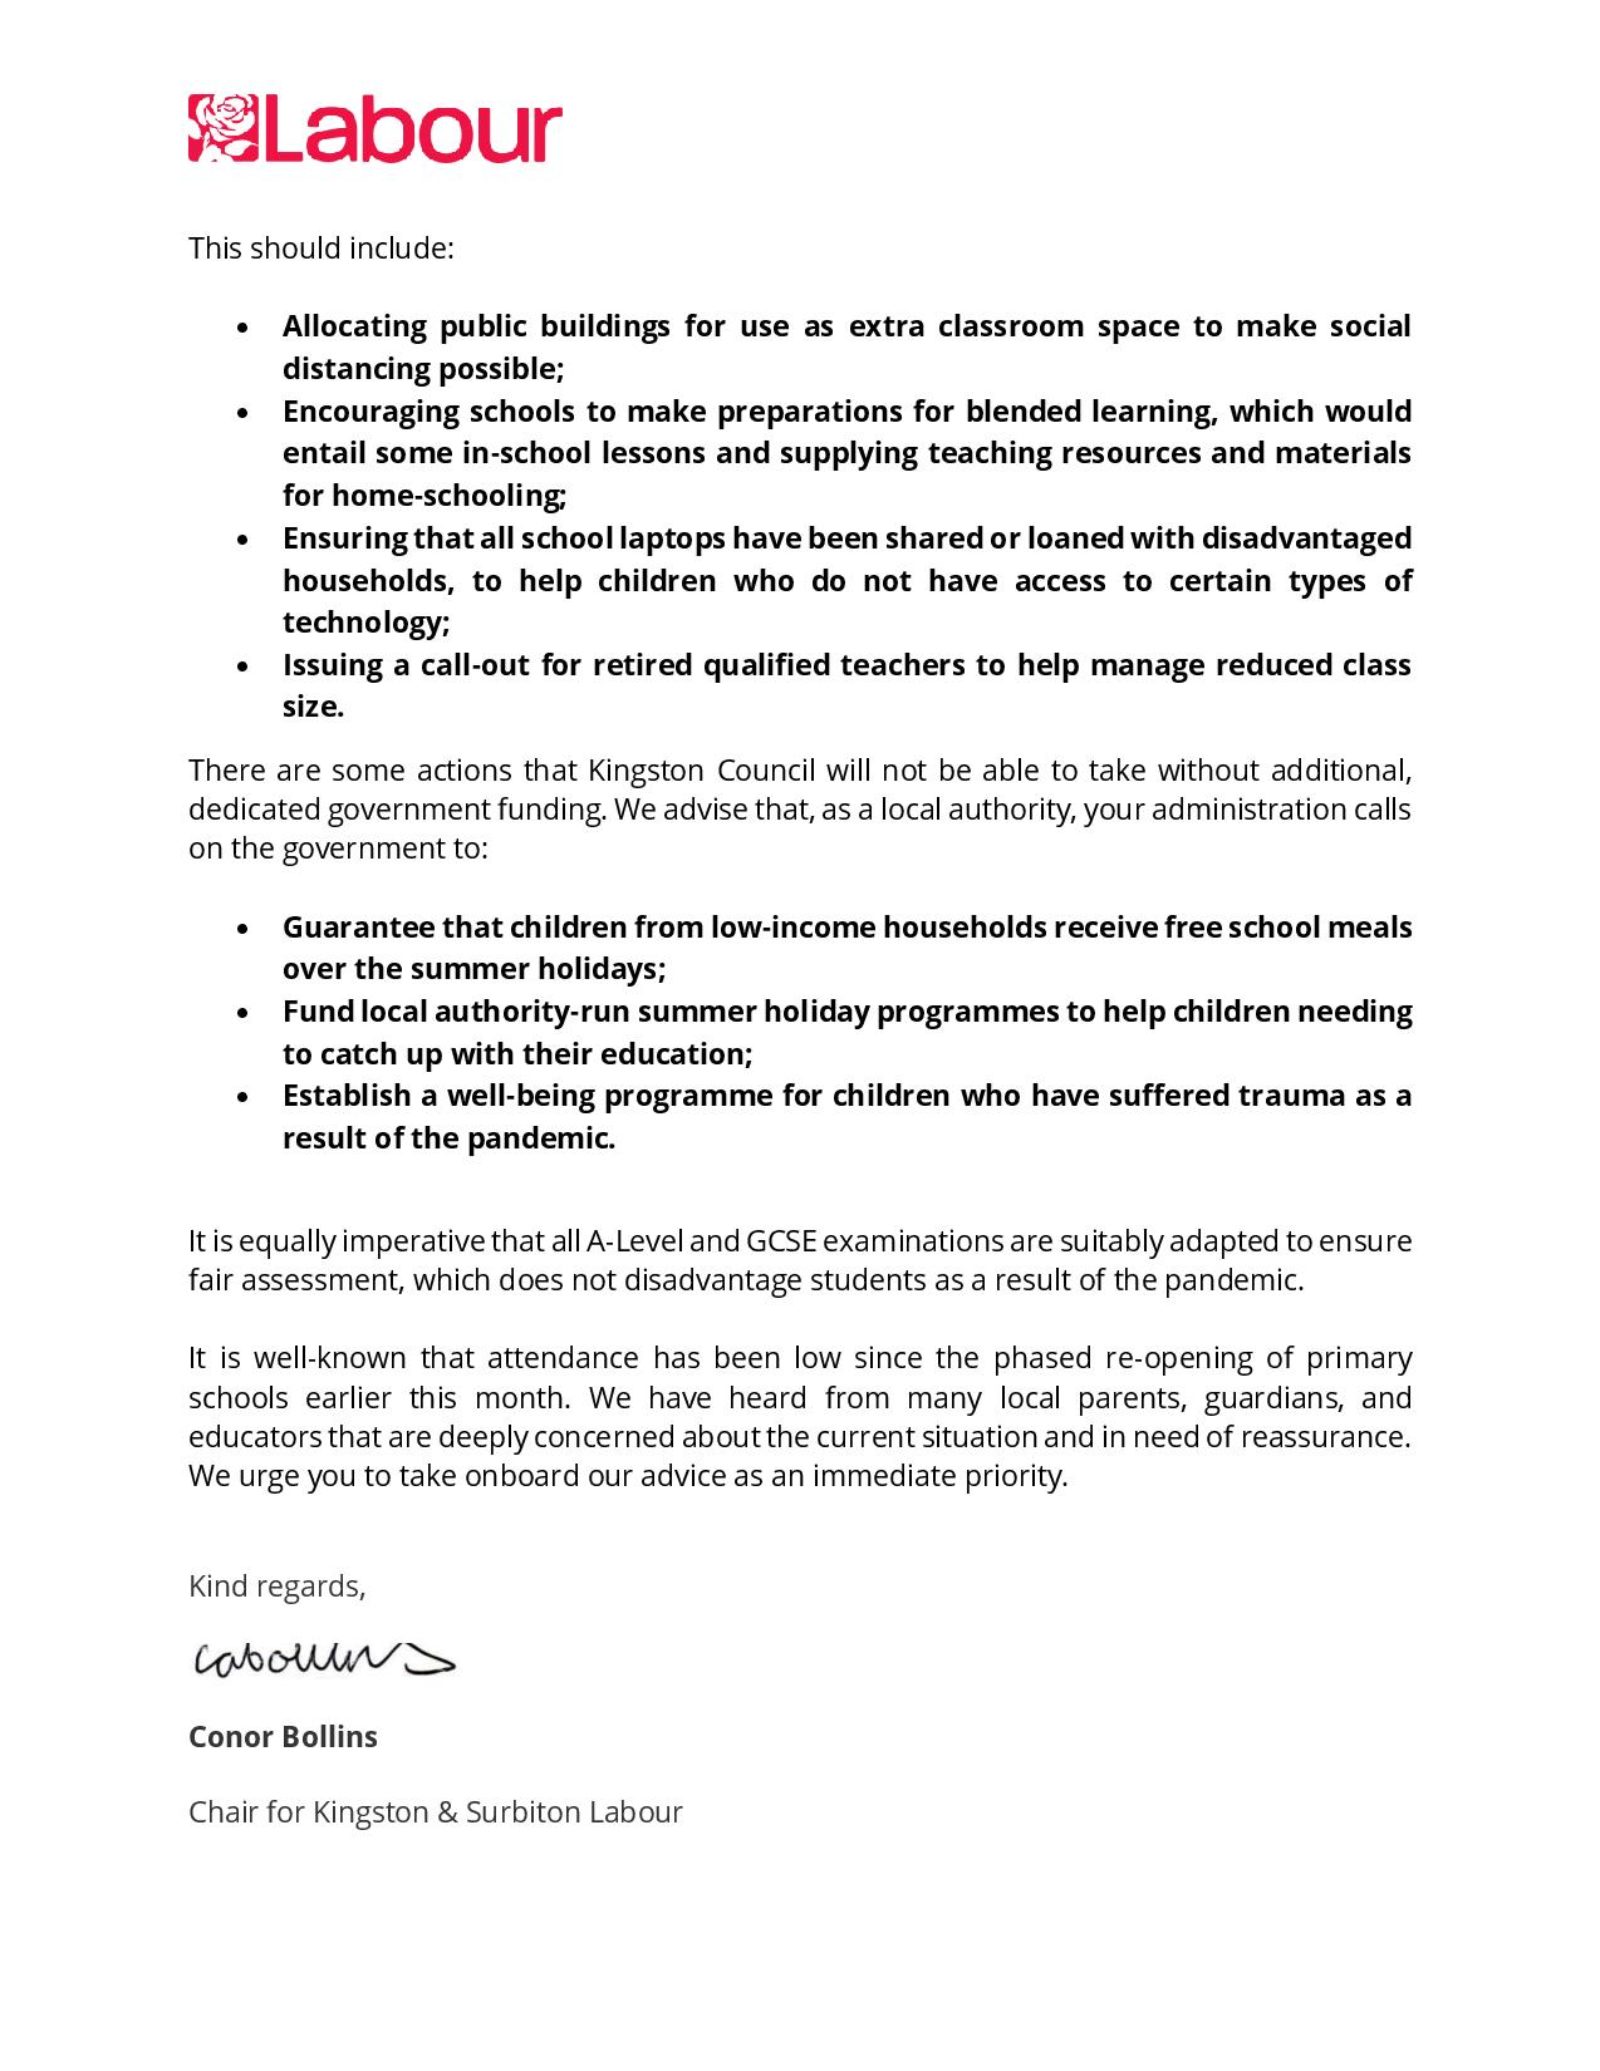 Letter to Council re School Recovery